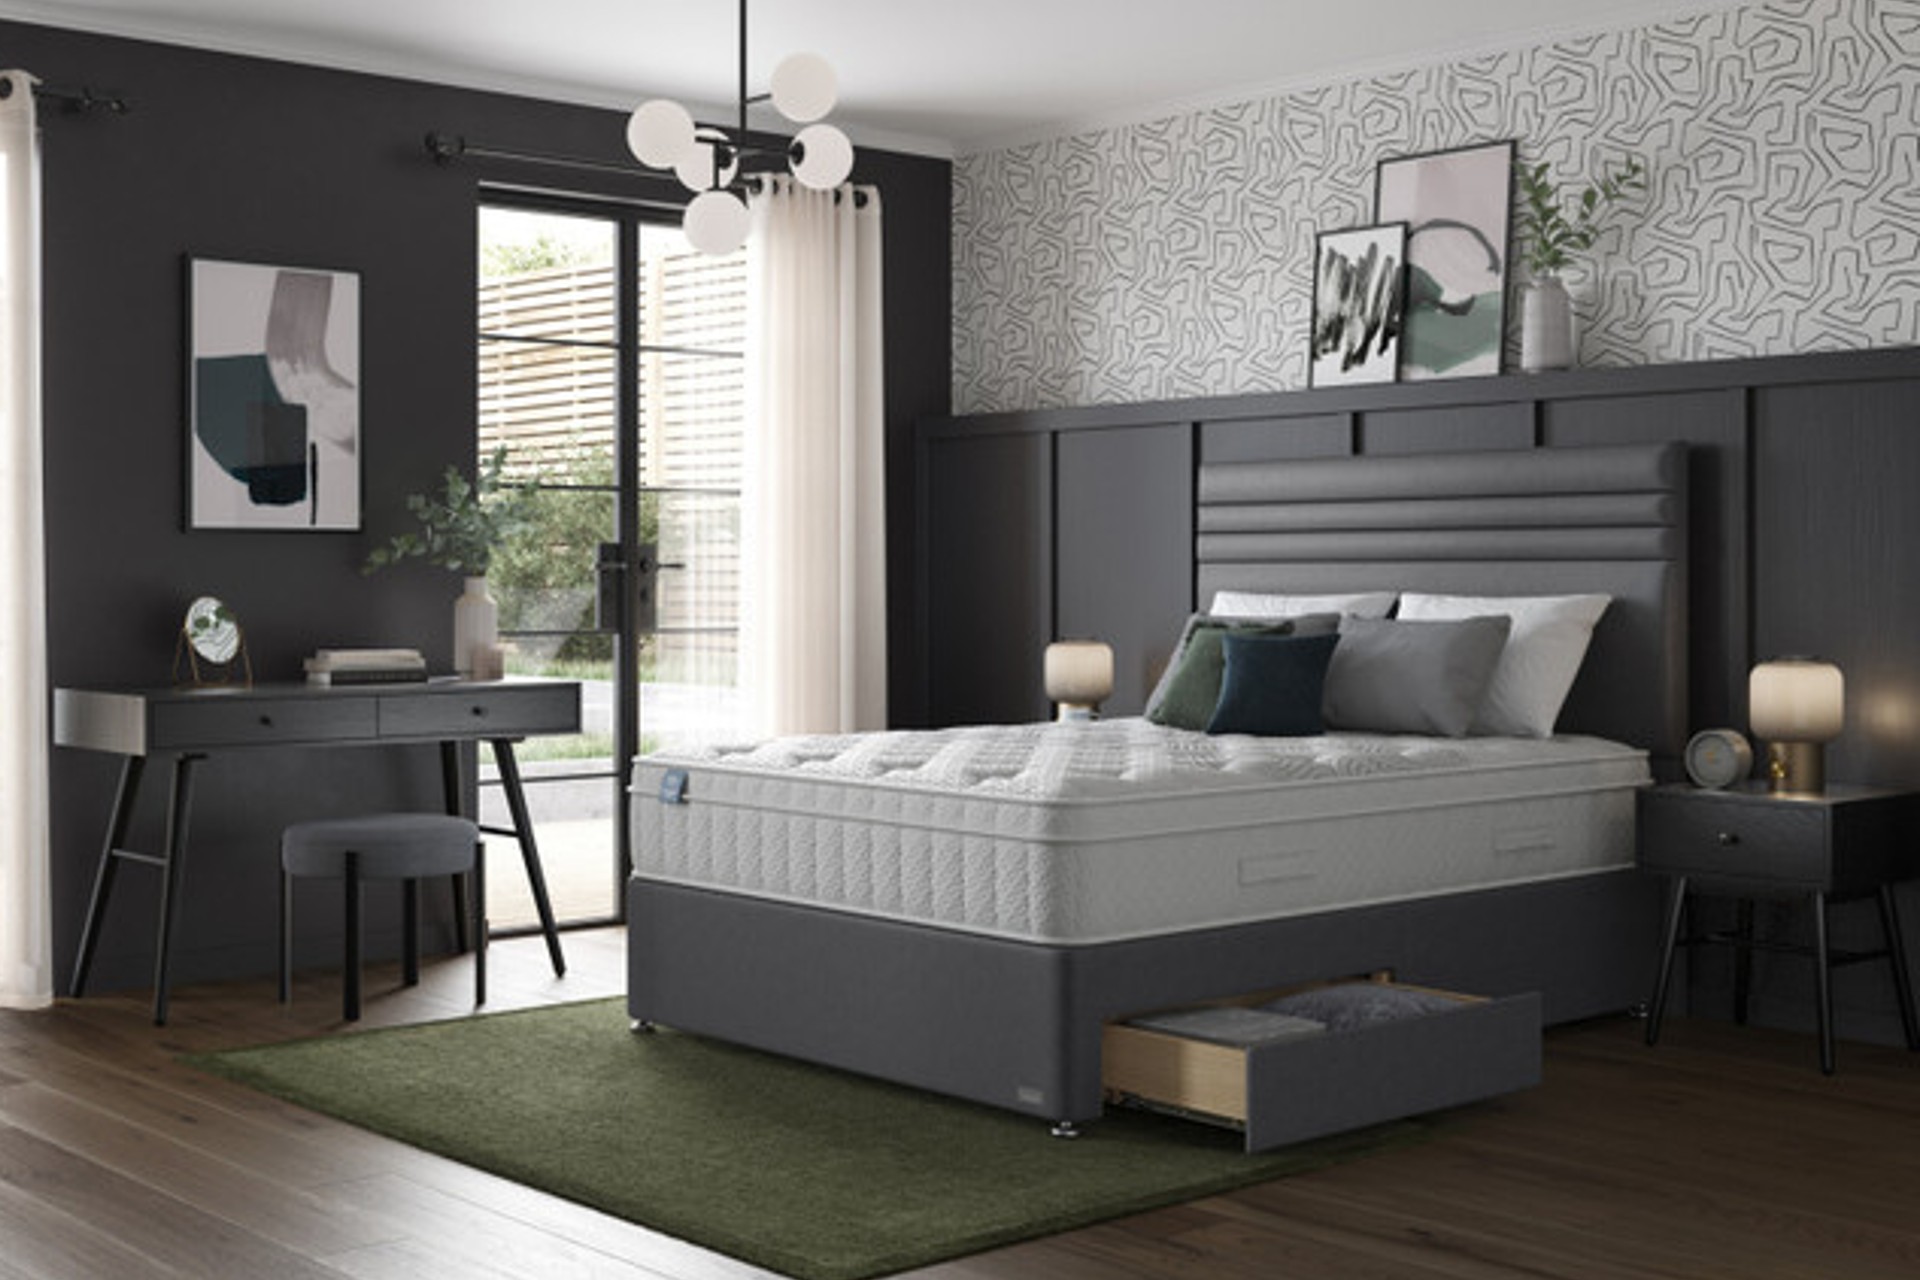 iGel Advance 2050i Mattress and Divan Bed Set On Glides in charcoal grey linen